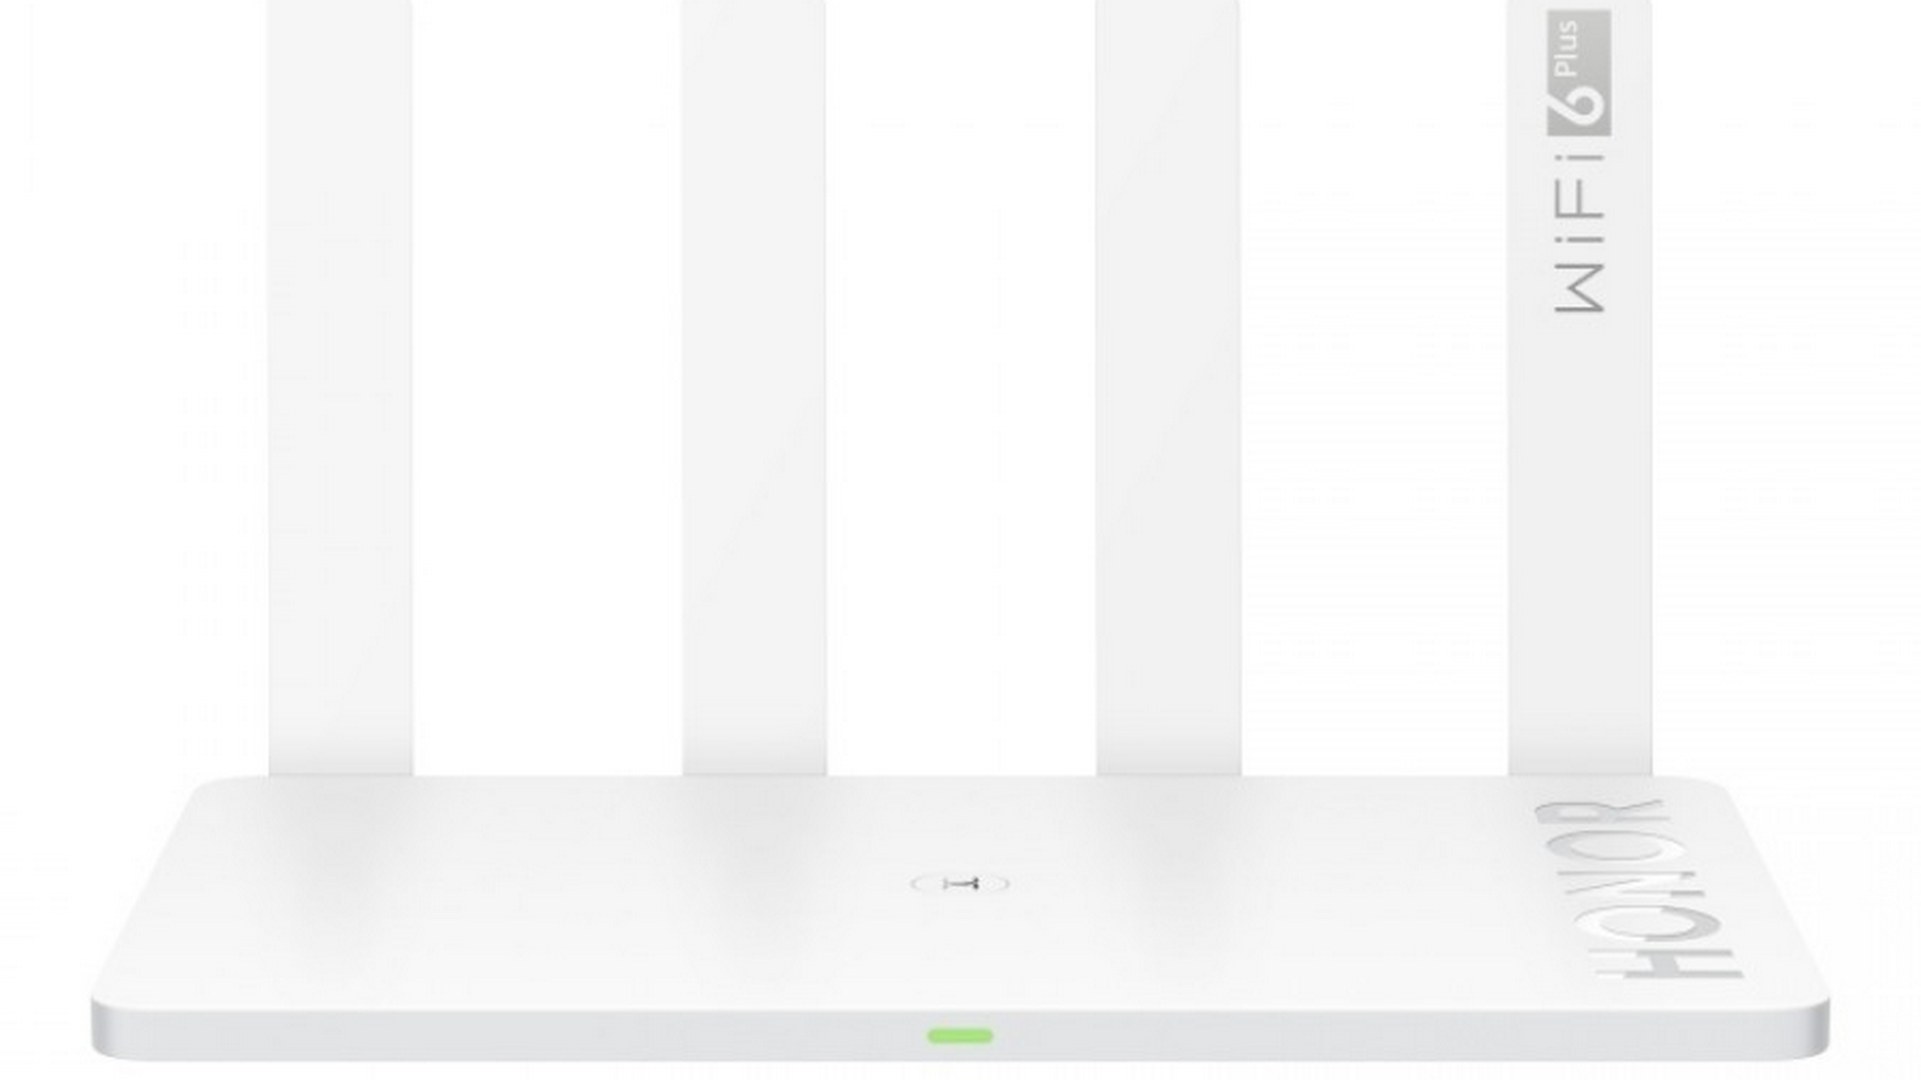 http://Honor%20Router%203%20Wi-Fi%206+%20–%20HiHonor